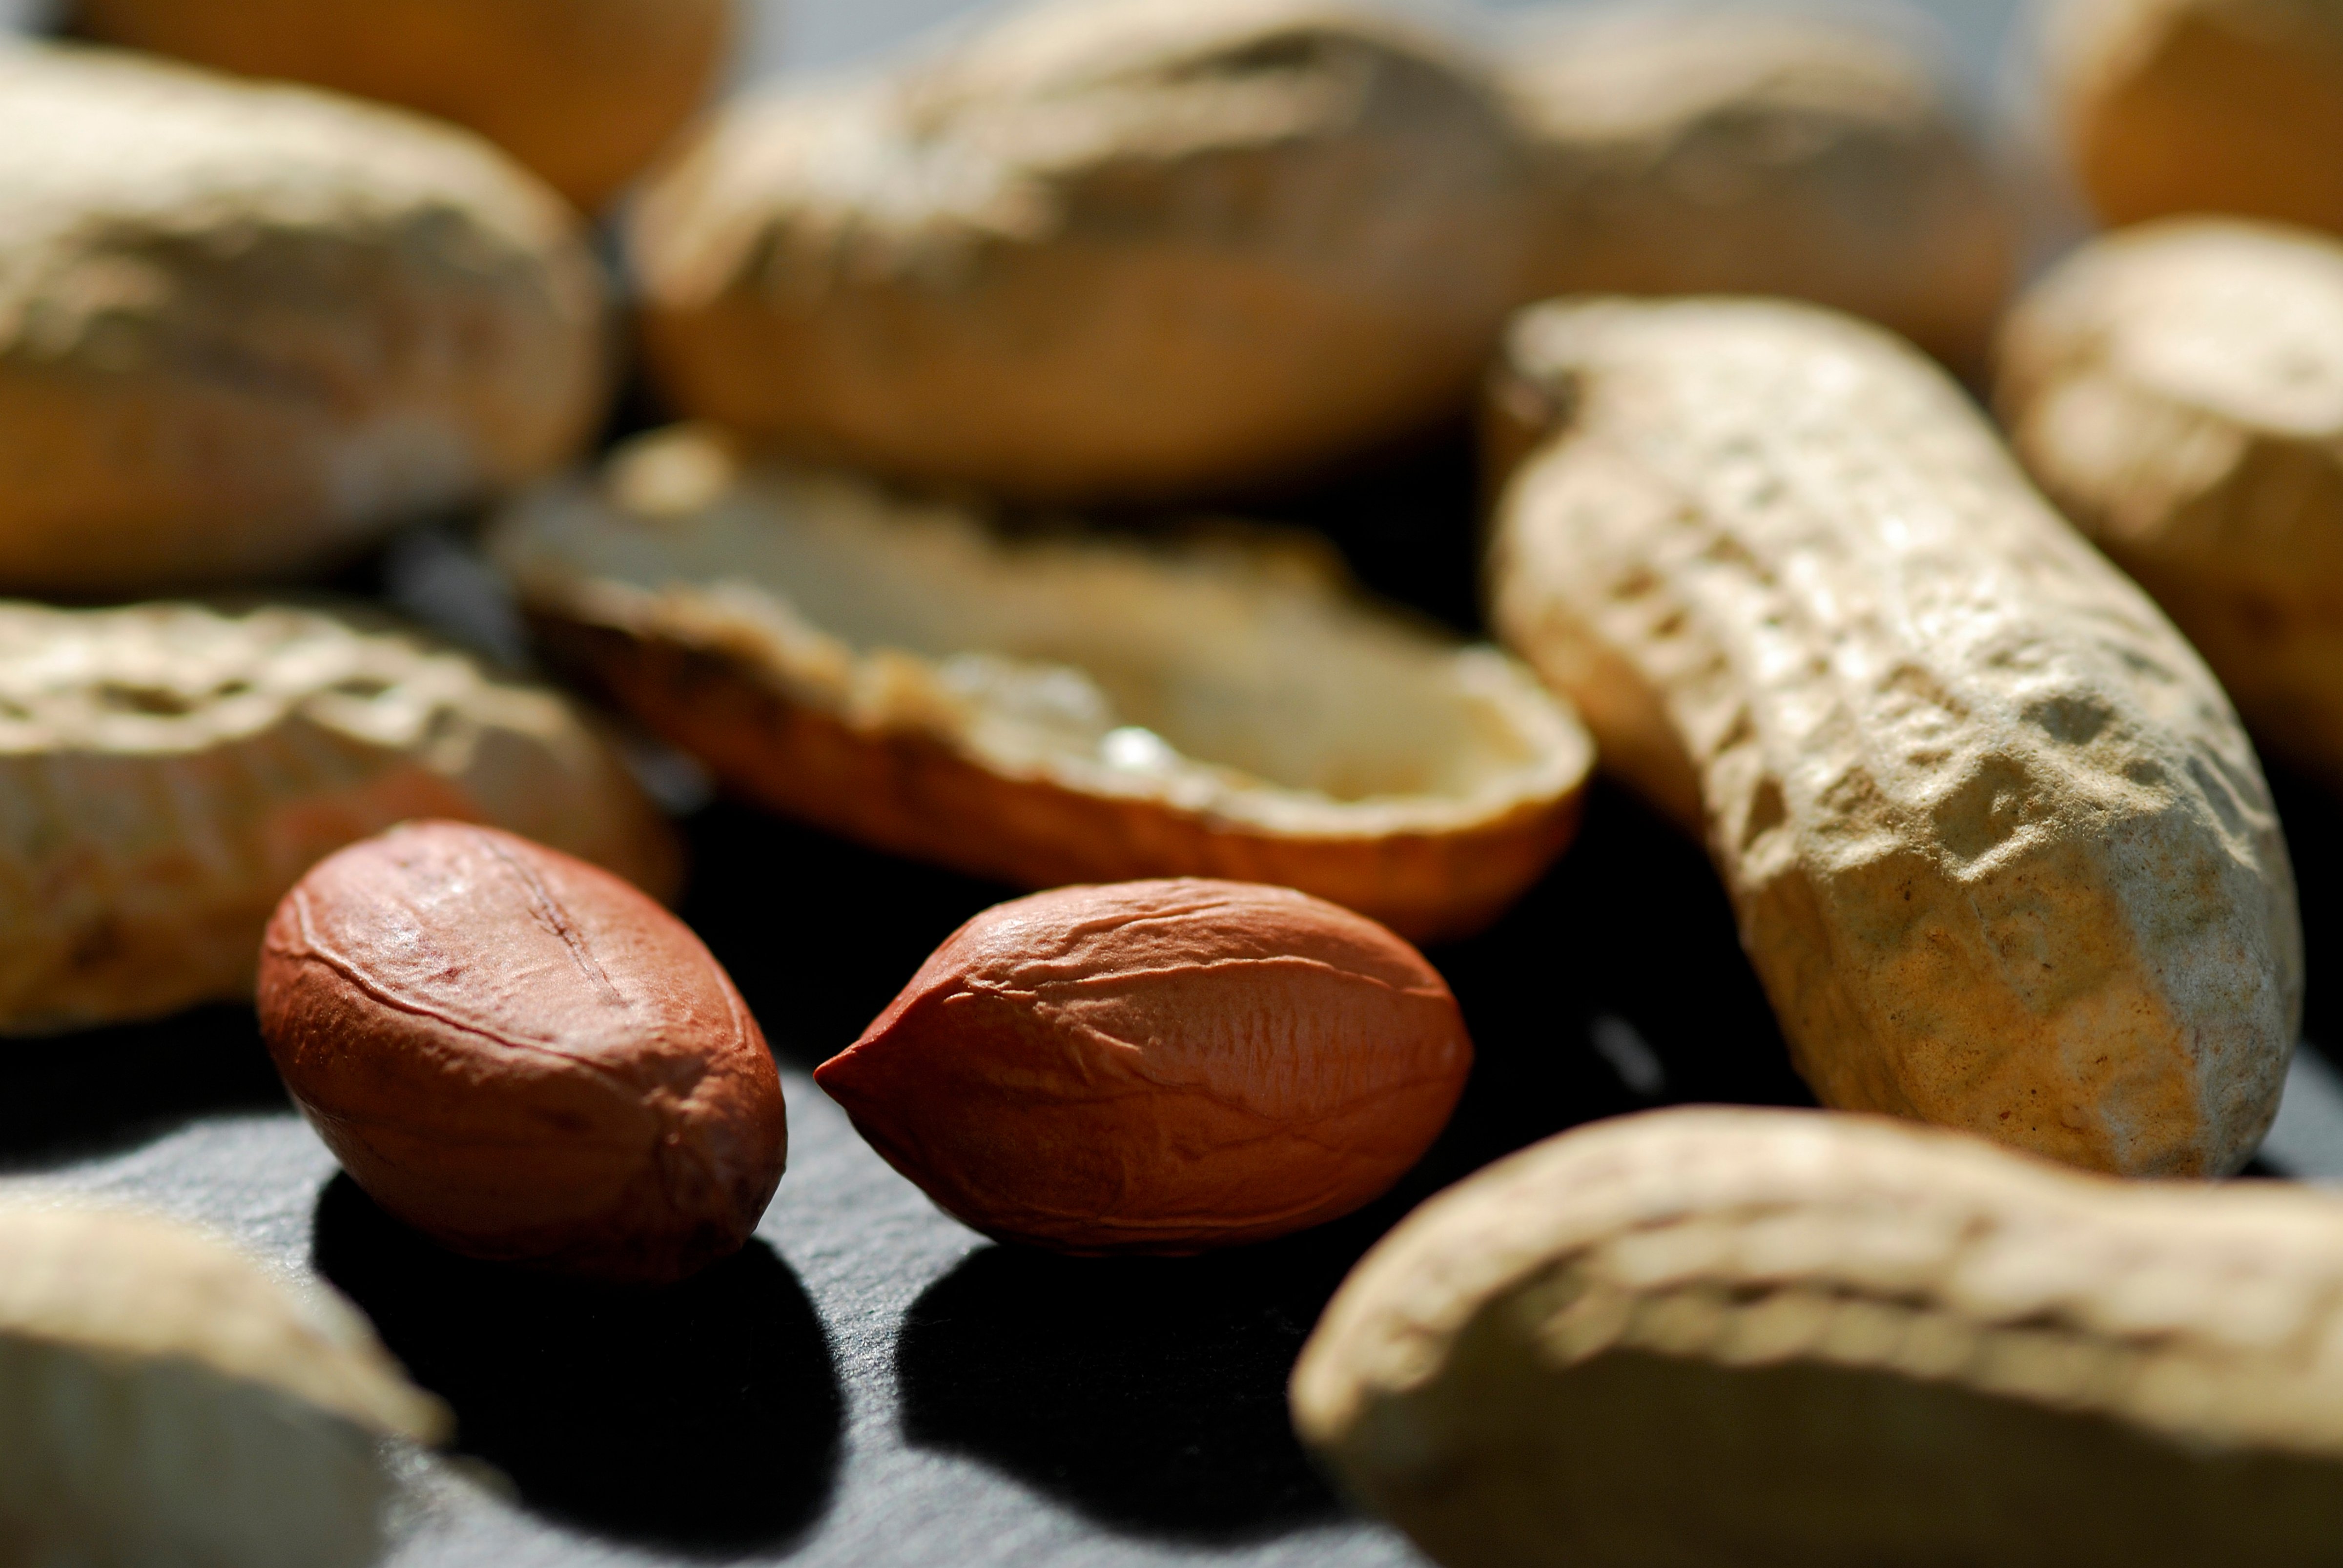 Peanut allergies have risen sharply, but a new therapy is in the beginning stages of research (Getty Images)